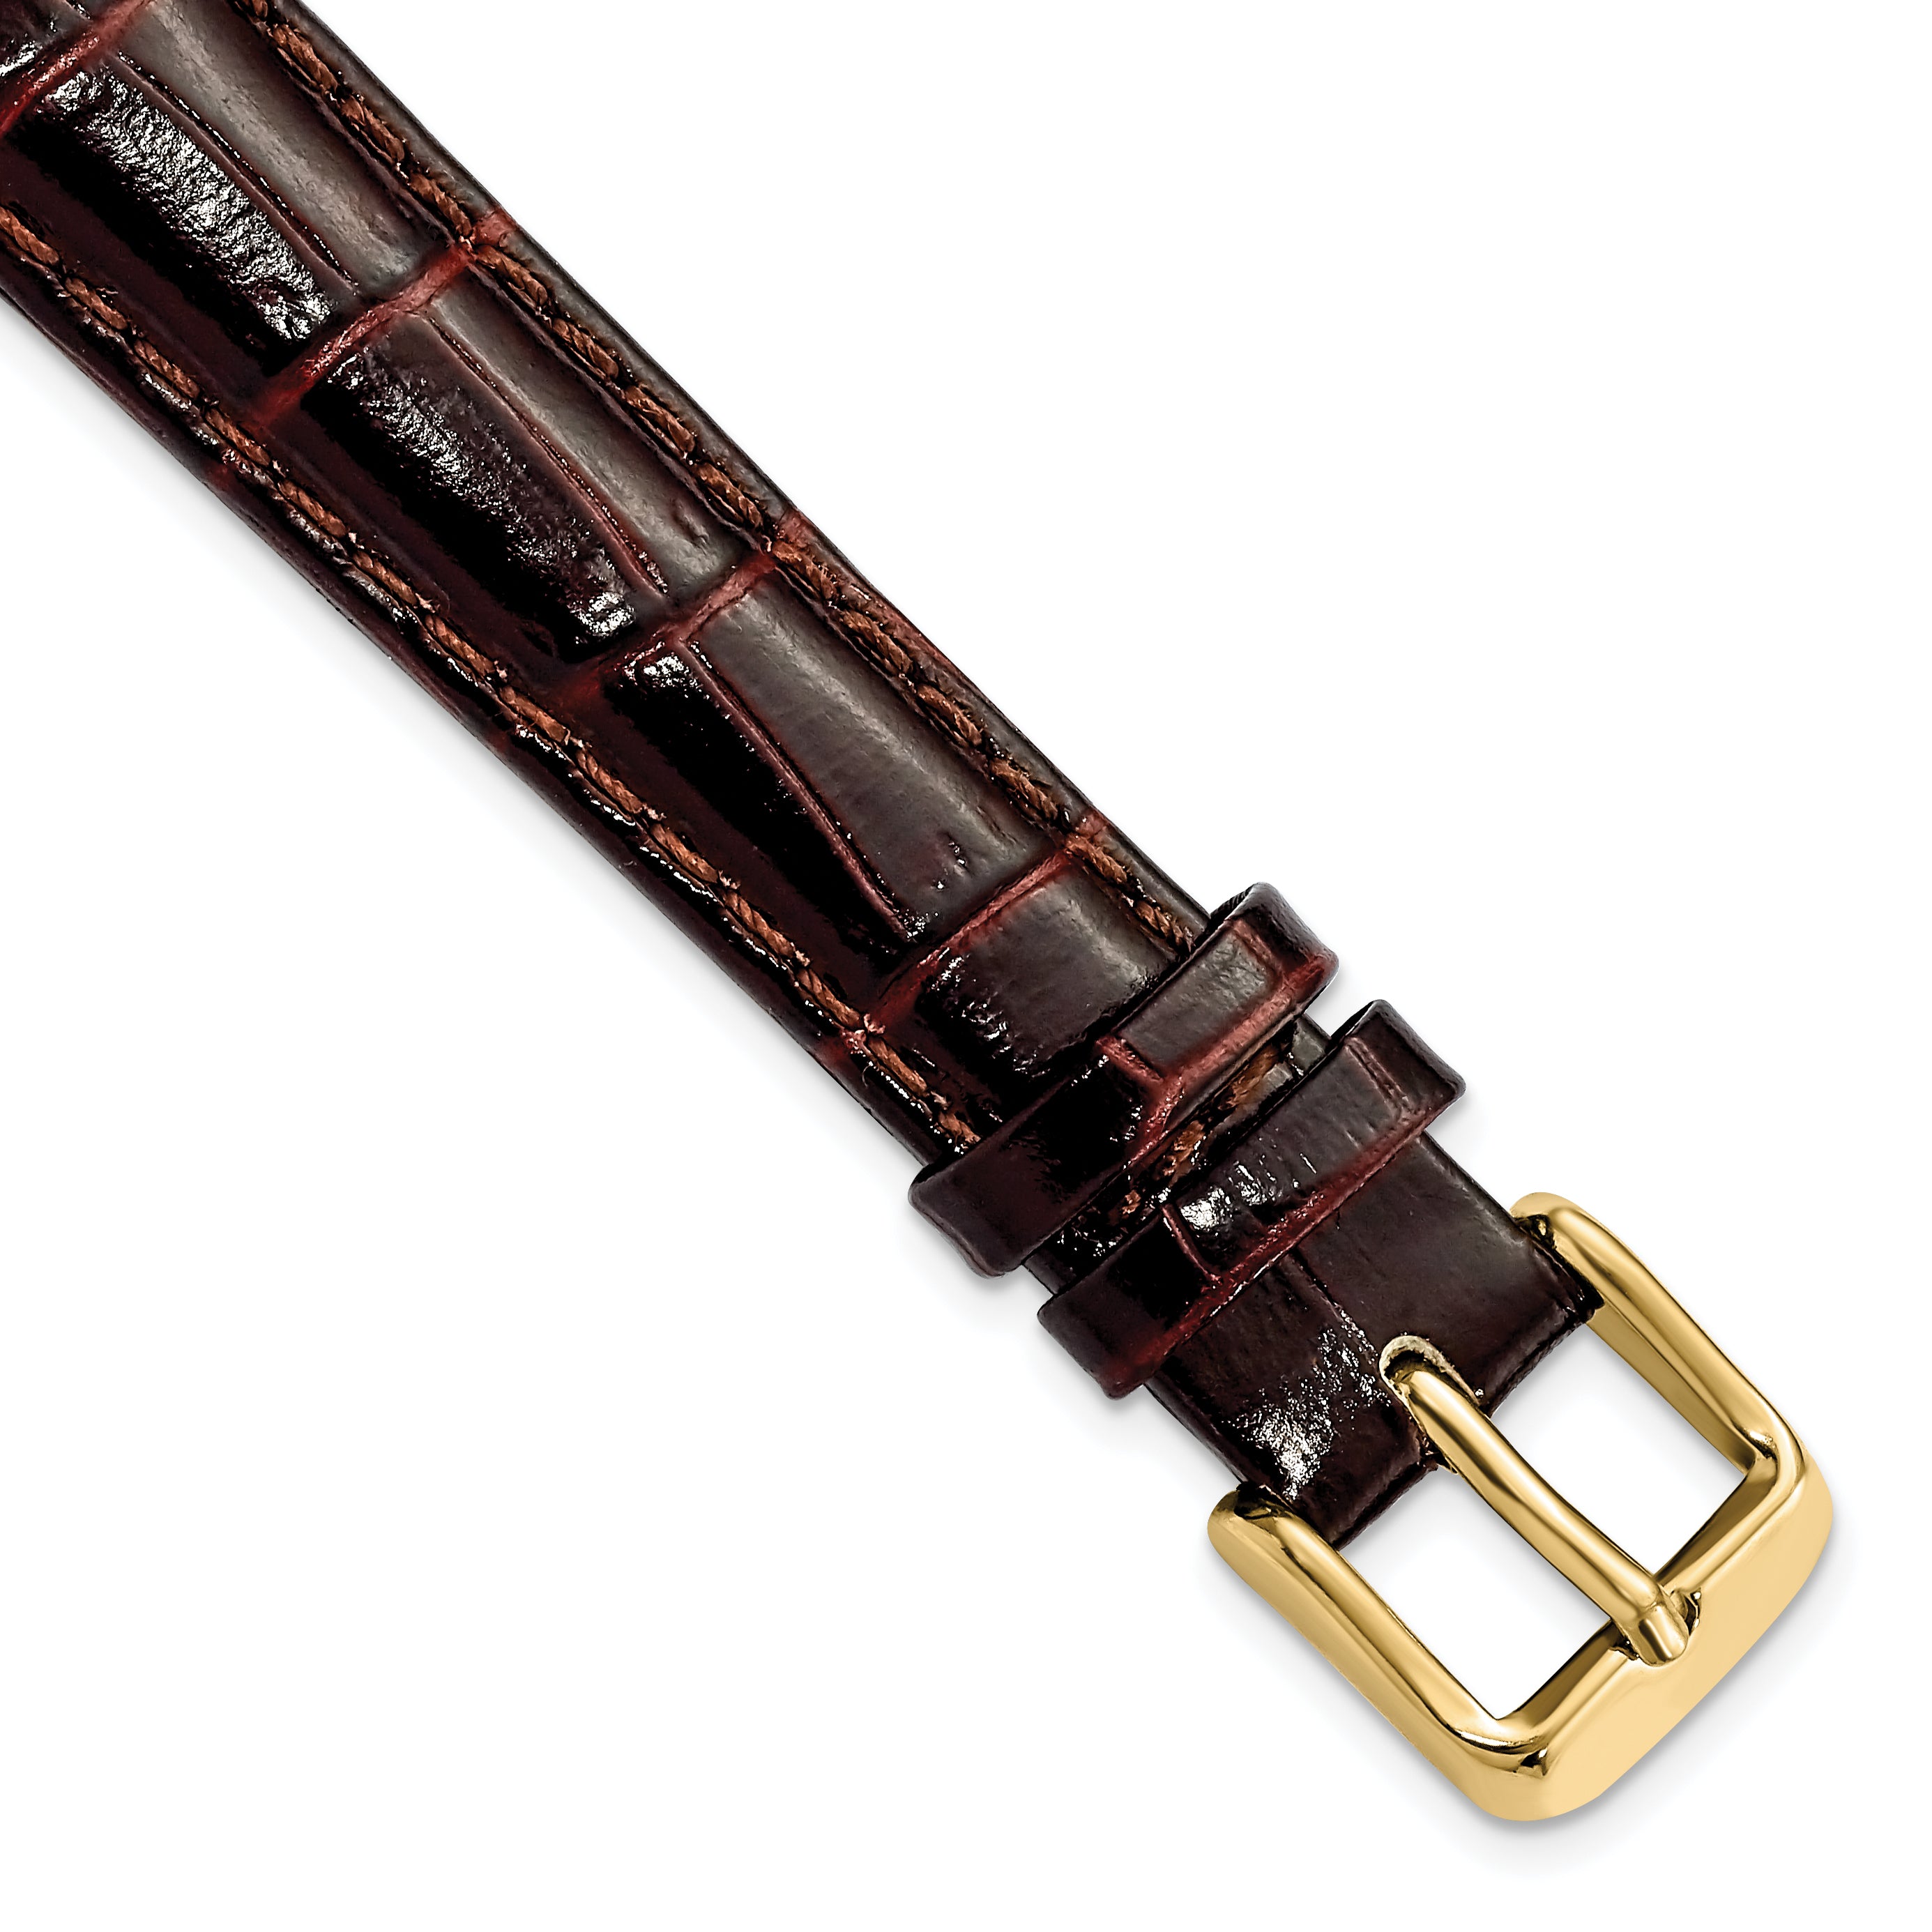 DeBeer 14mm Dark Brown Crocodile Grain Chronograph Leather with Gold-tone Buckle 6.75 inch Watch Band